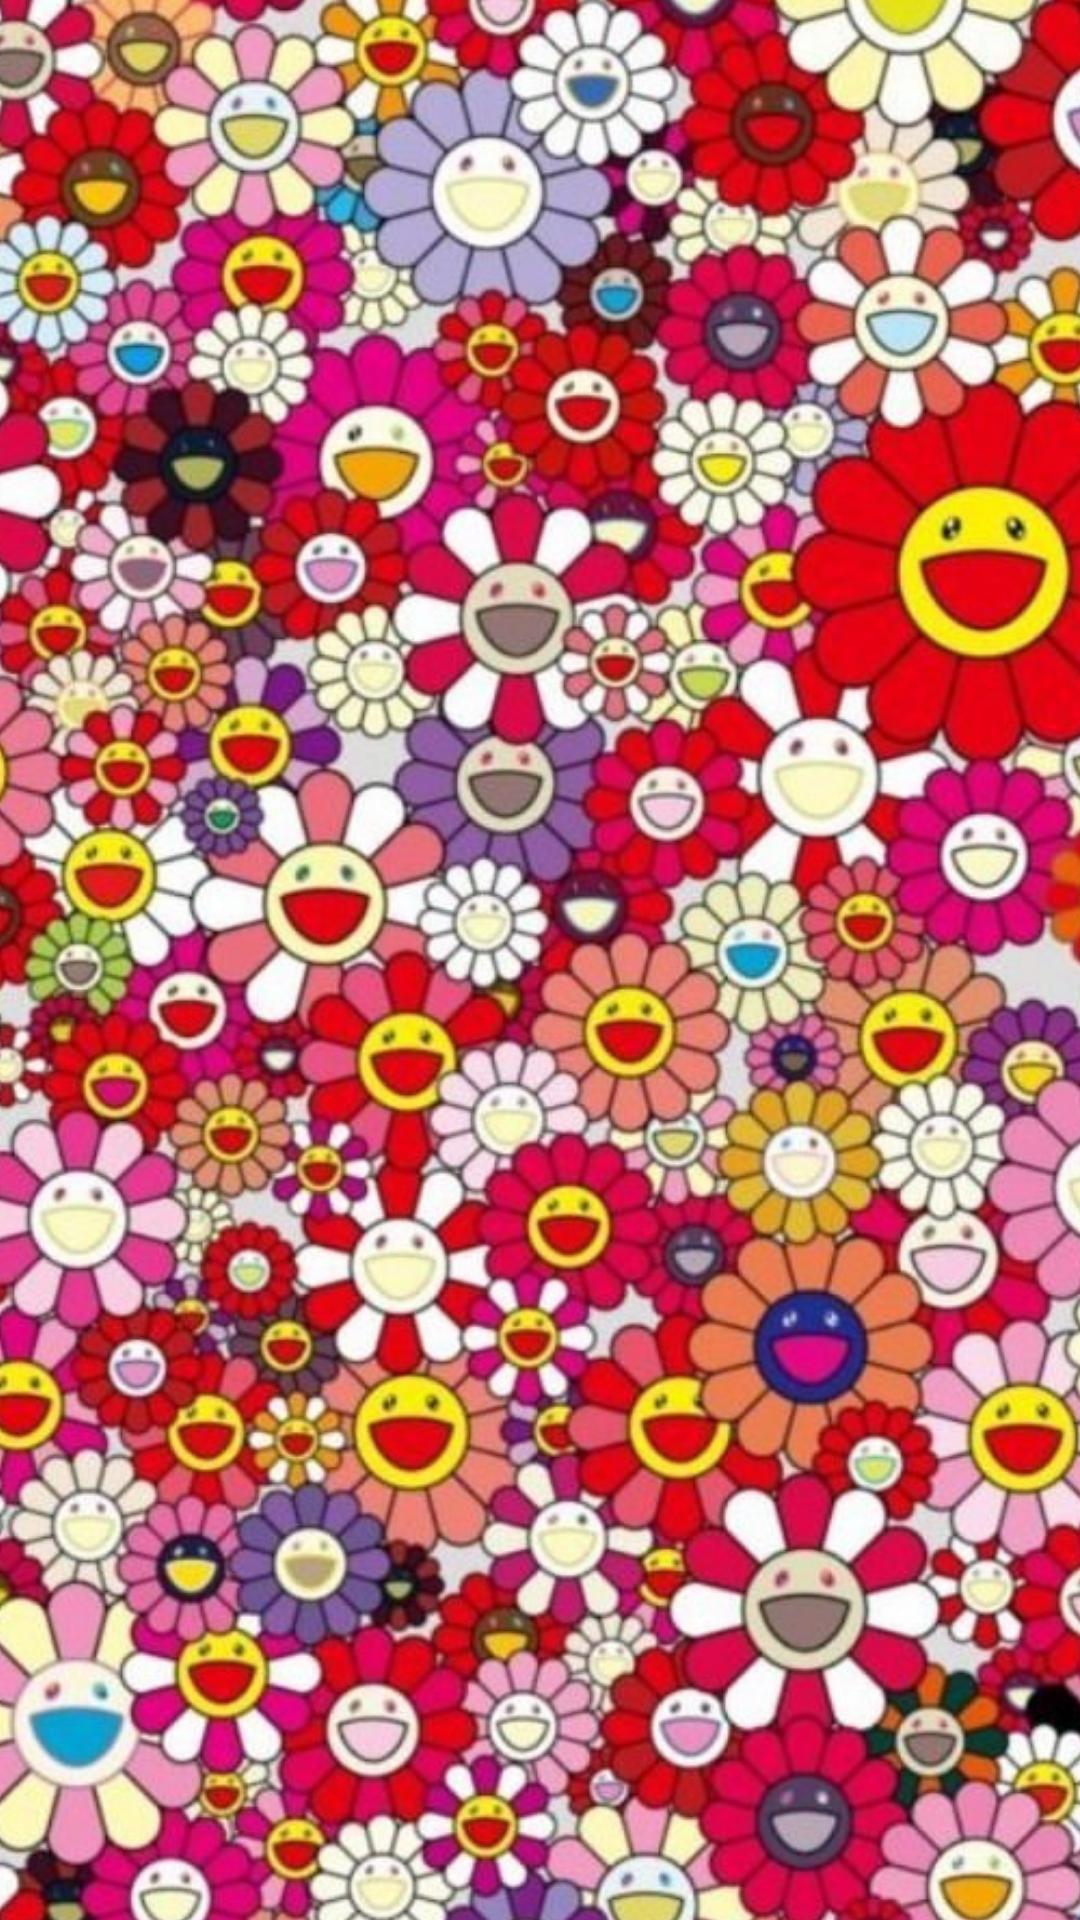 A colorful flower pattern with many different flowers - Indie